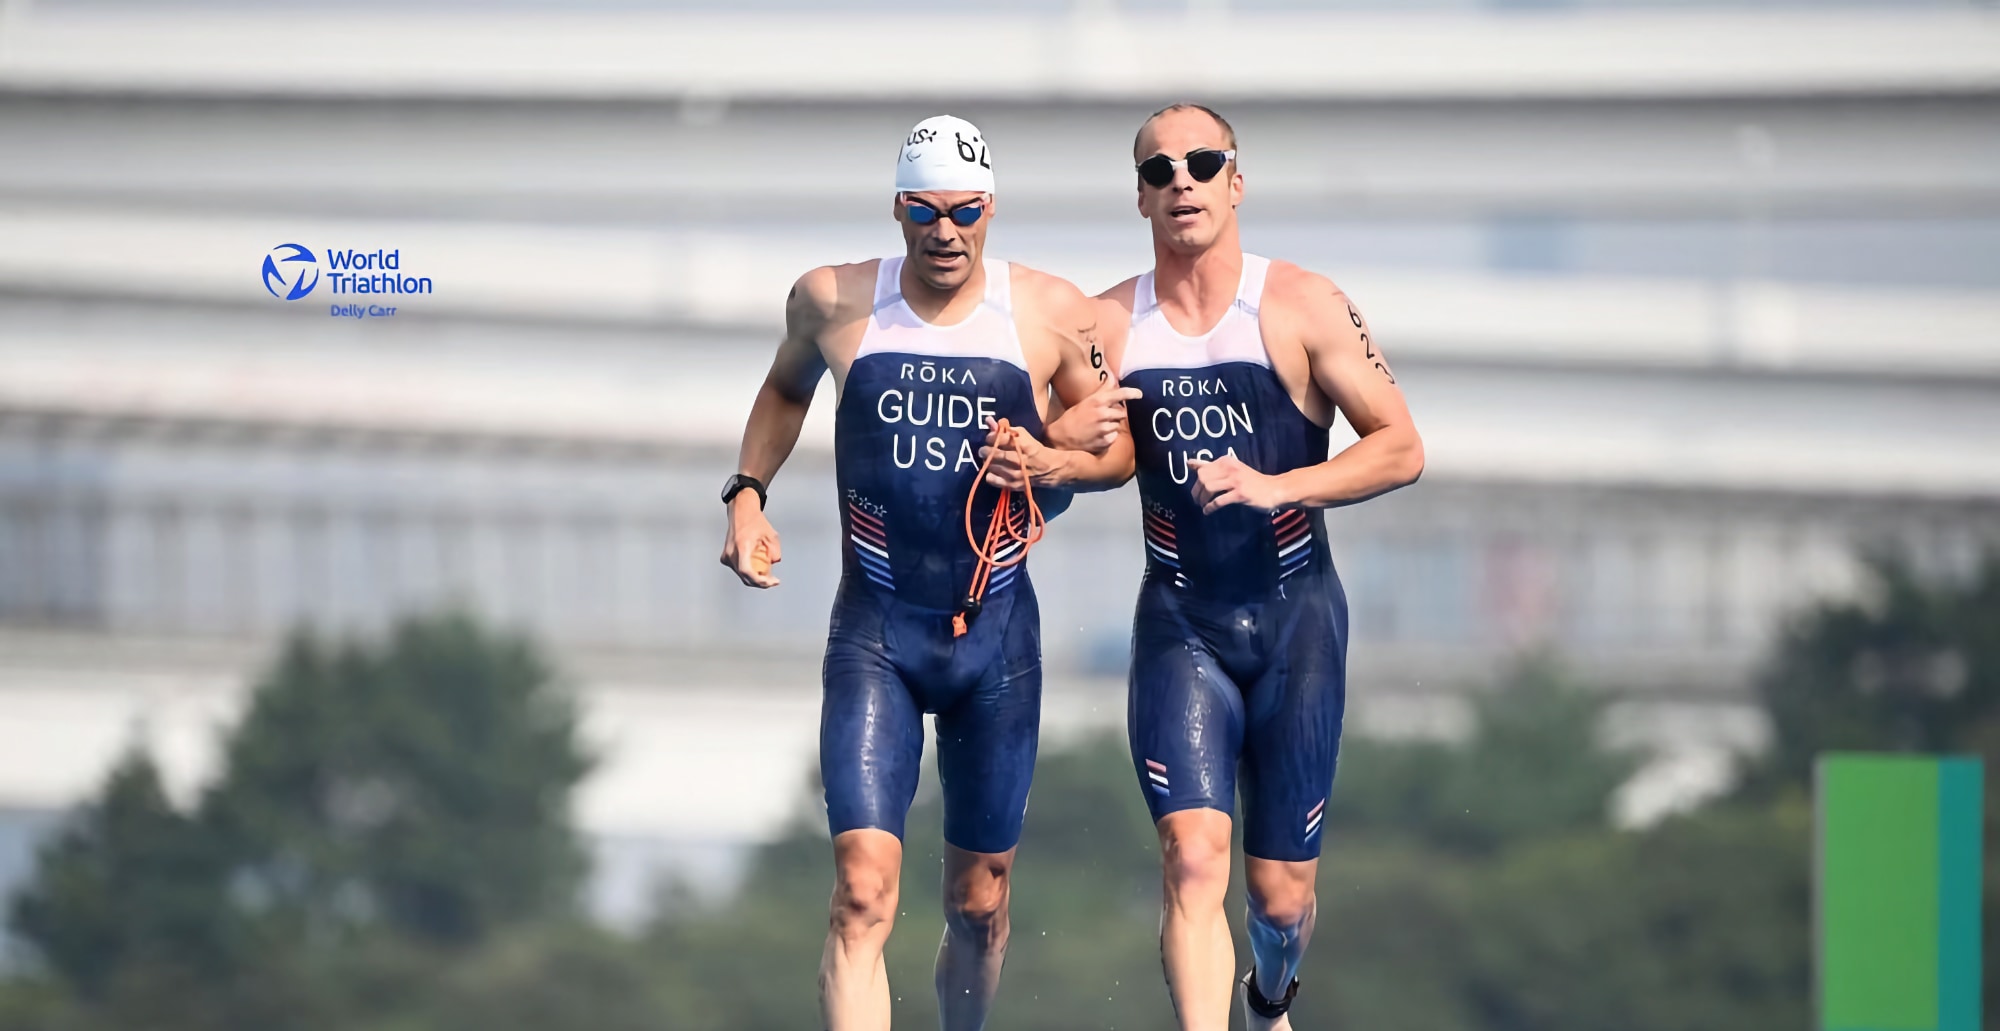 Two athletes running out of the water during the Paralympic Games in Tokyo. They are both wearing blue triathlon suits with USA written on them. The man on the right of the picture has Guide written on his suit and the man on the left has the name Coon written on his. They are both wearing swim caps and goggles.